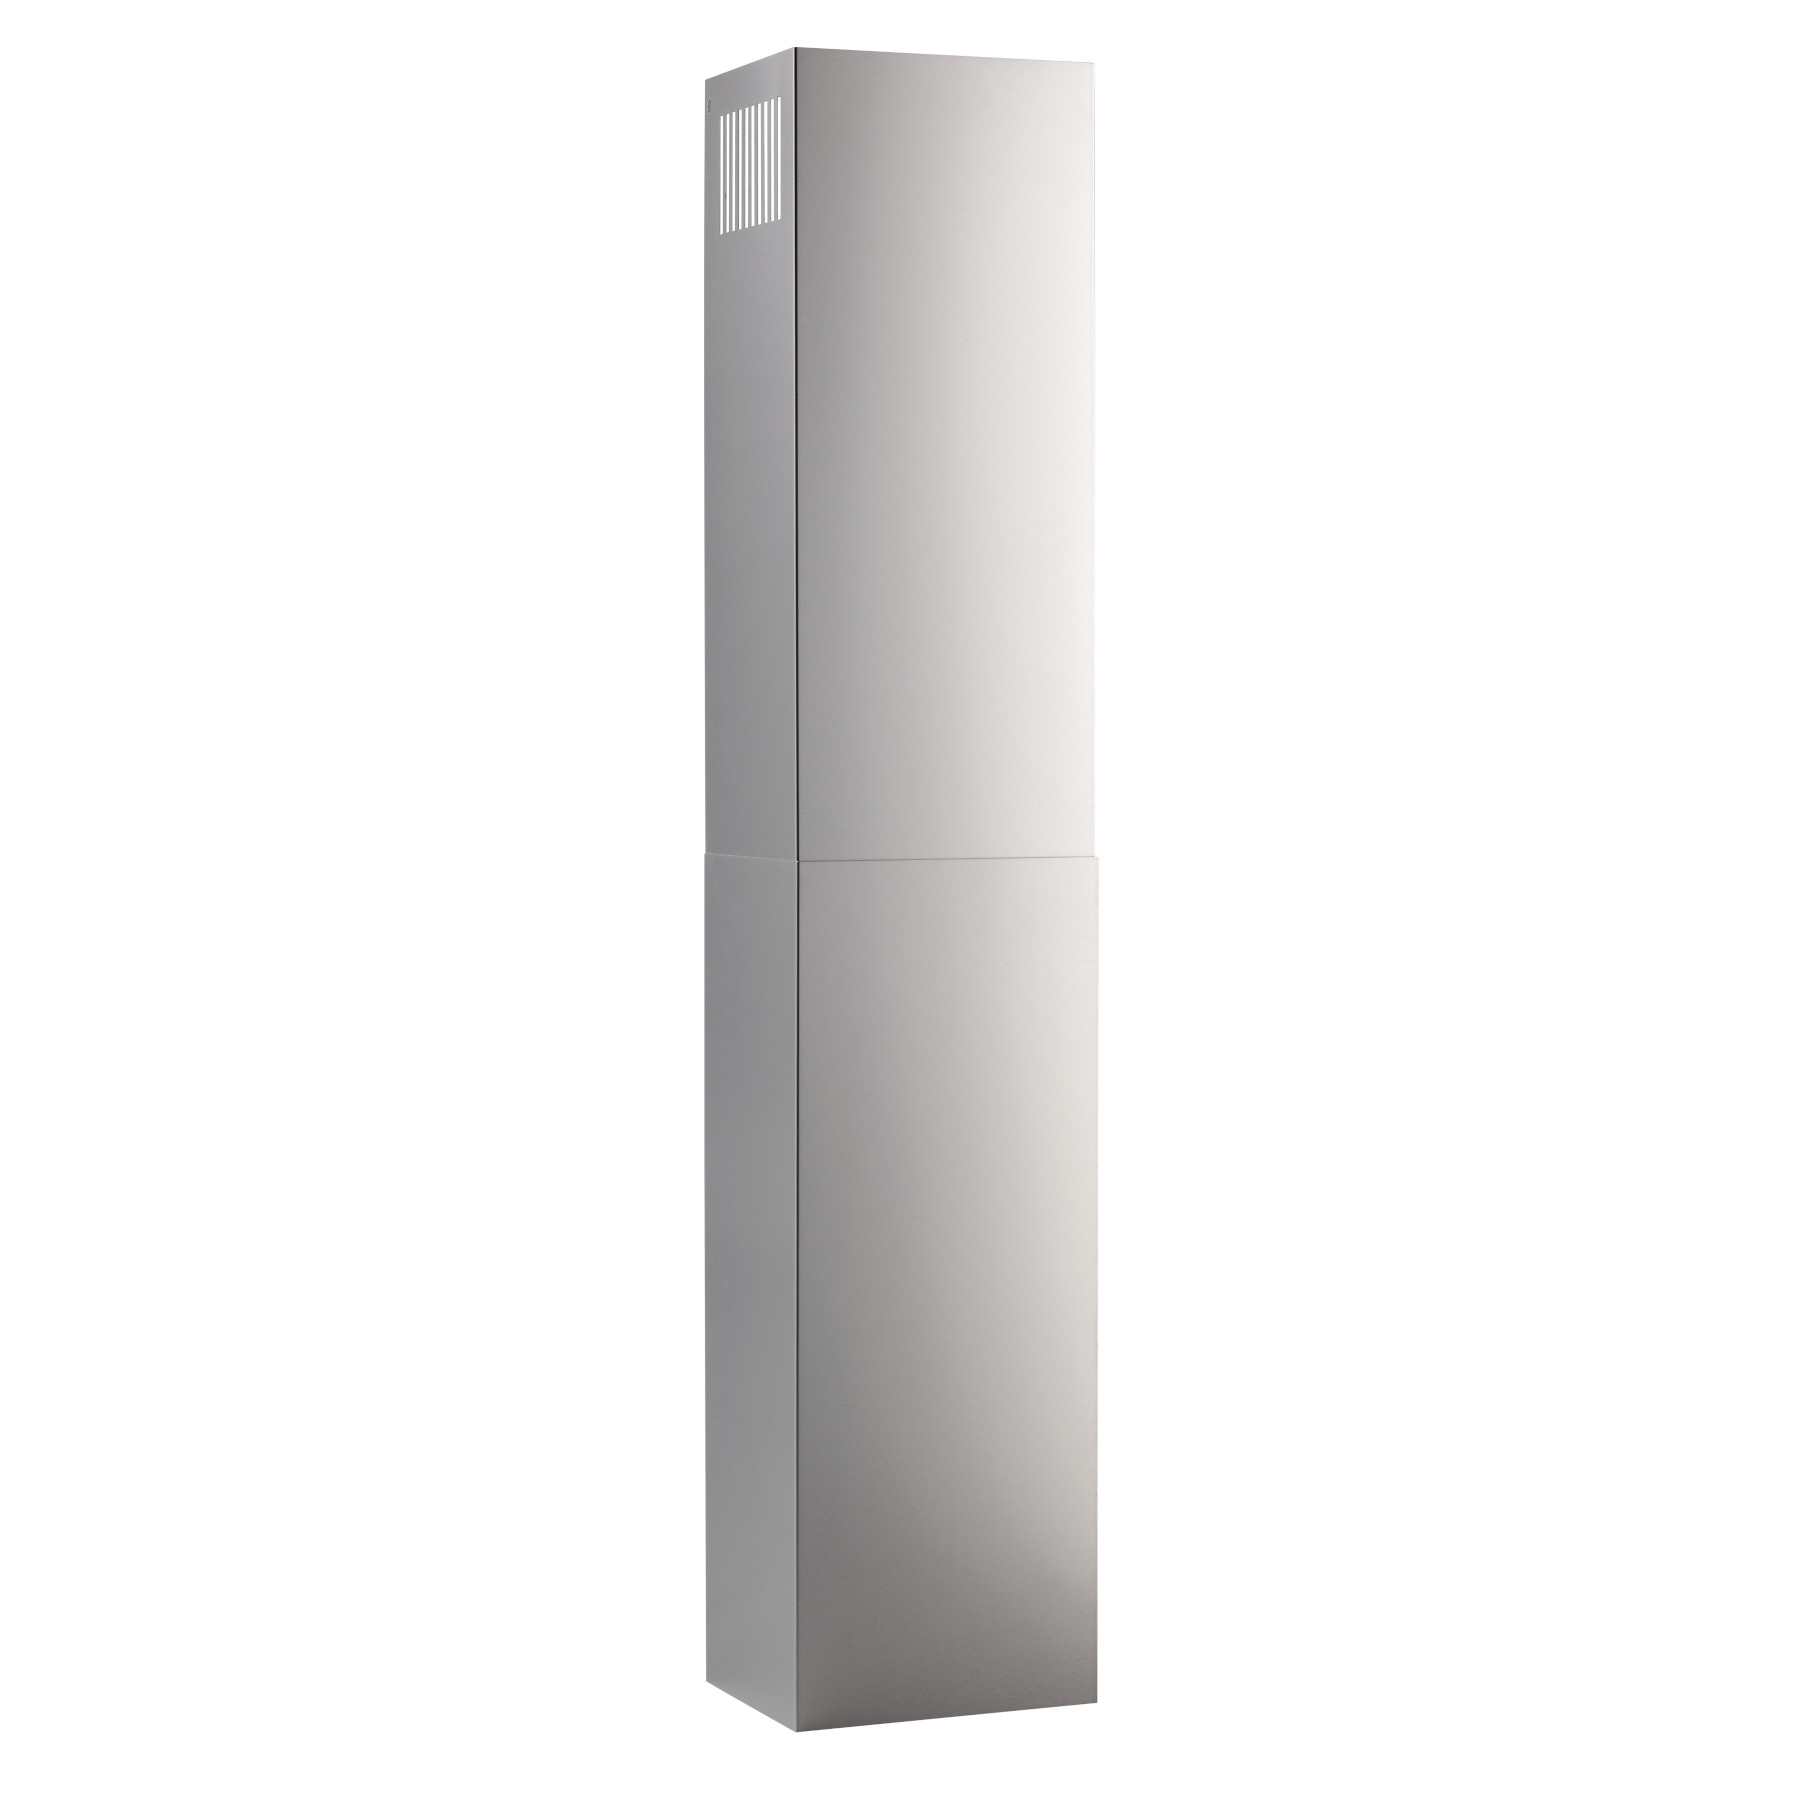 DISCONTINUED: Optional Flue Extension for EW58 Broan® Elite Range Hoods in Stainless Steel